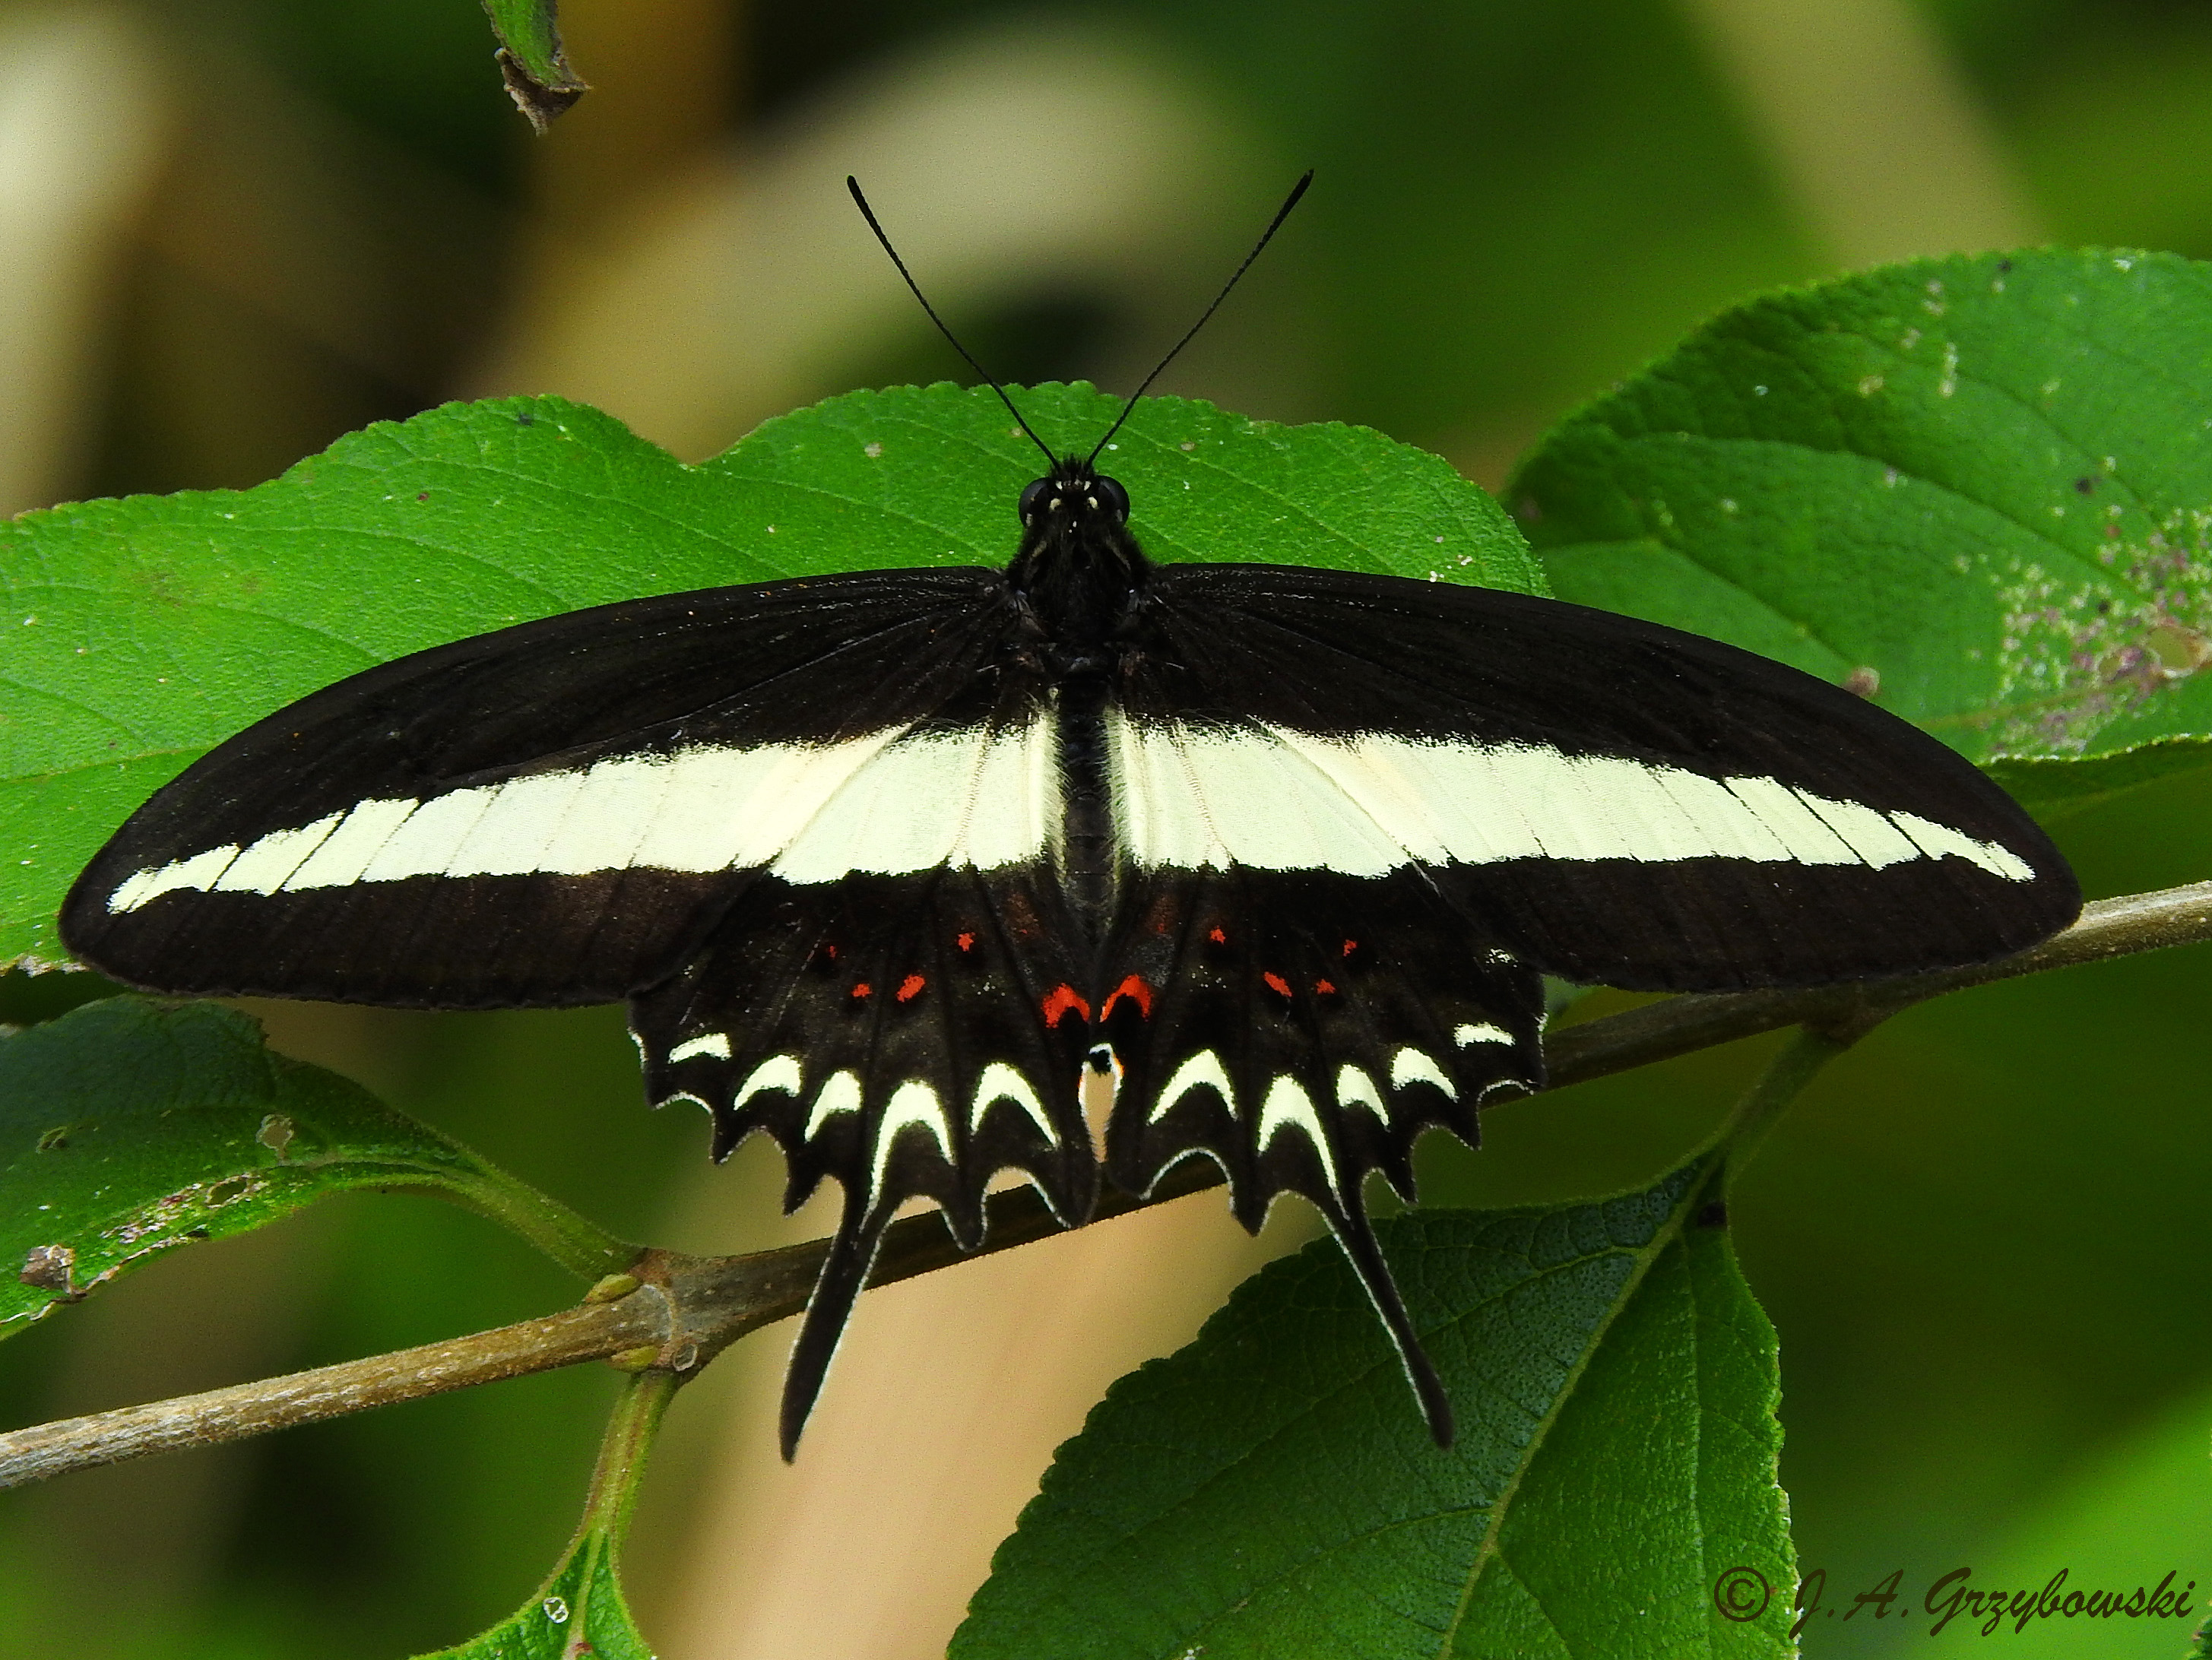 Hectors Swallowtail (Papilio hectorides)